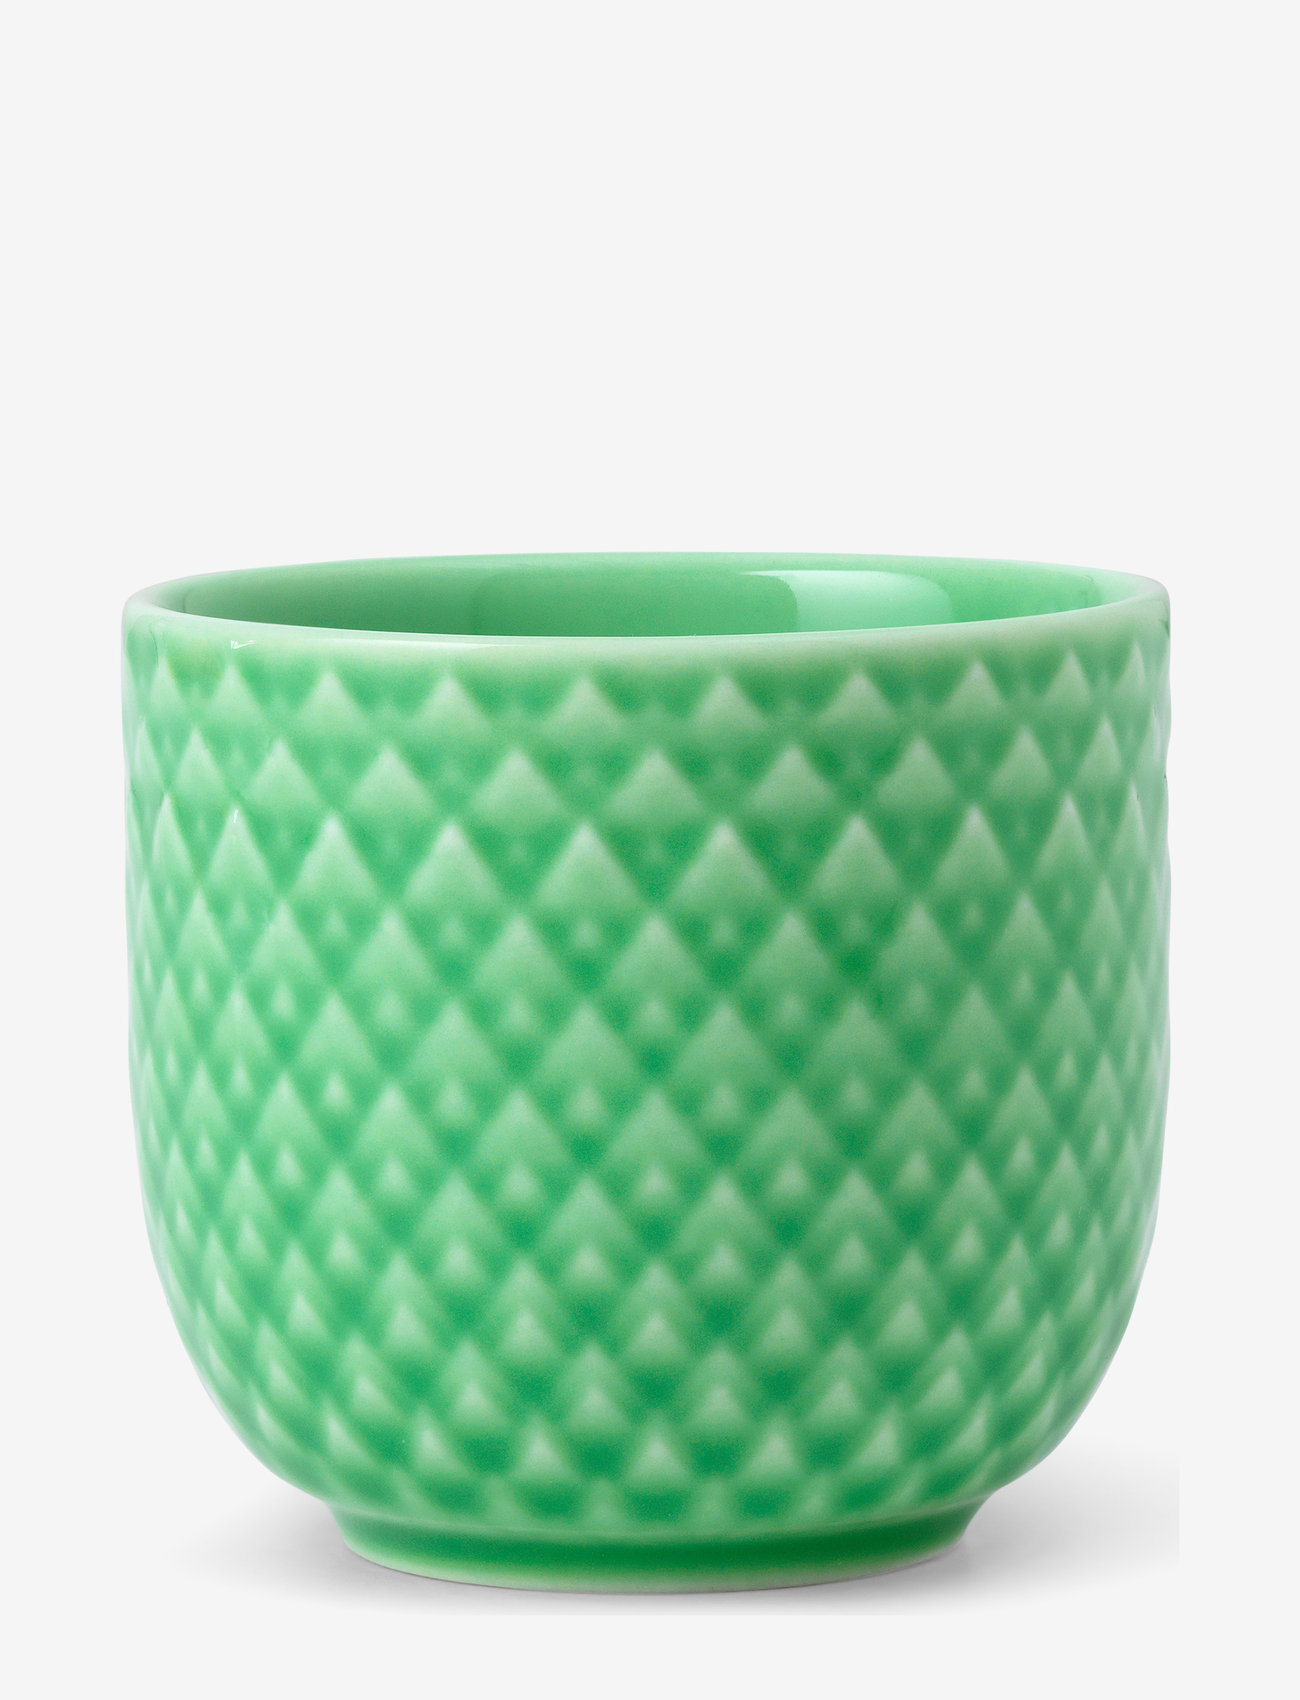 Lyngby Porcelæn - Rhombe Color egg cup - lowest prices - green - 0